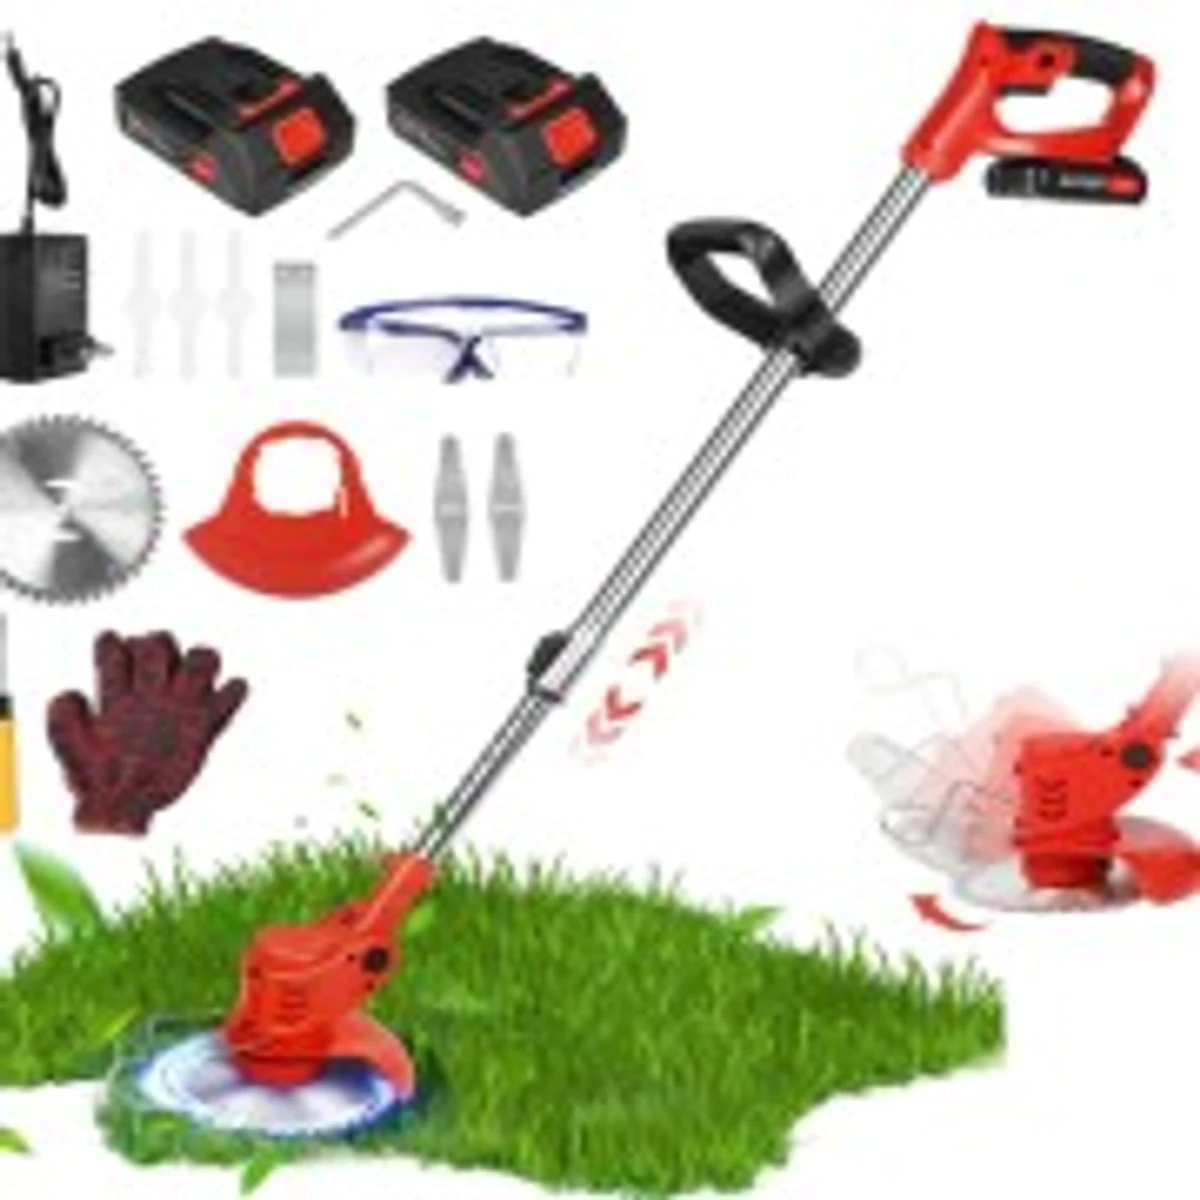 21V Cordless Grass String Trimmer 21000RPM Electric Lawn Mower Weed Adjustable Foldable Cutter Garden with 2 Battery